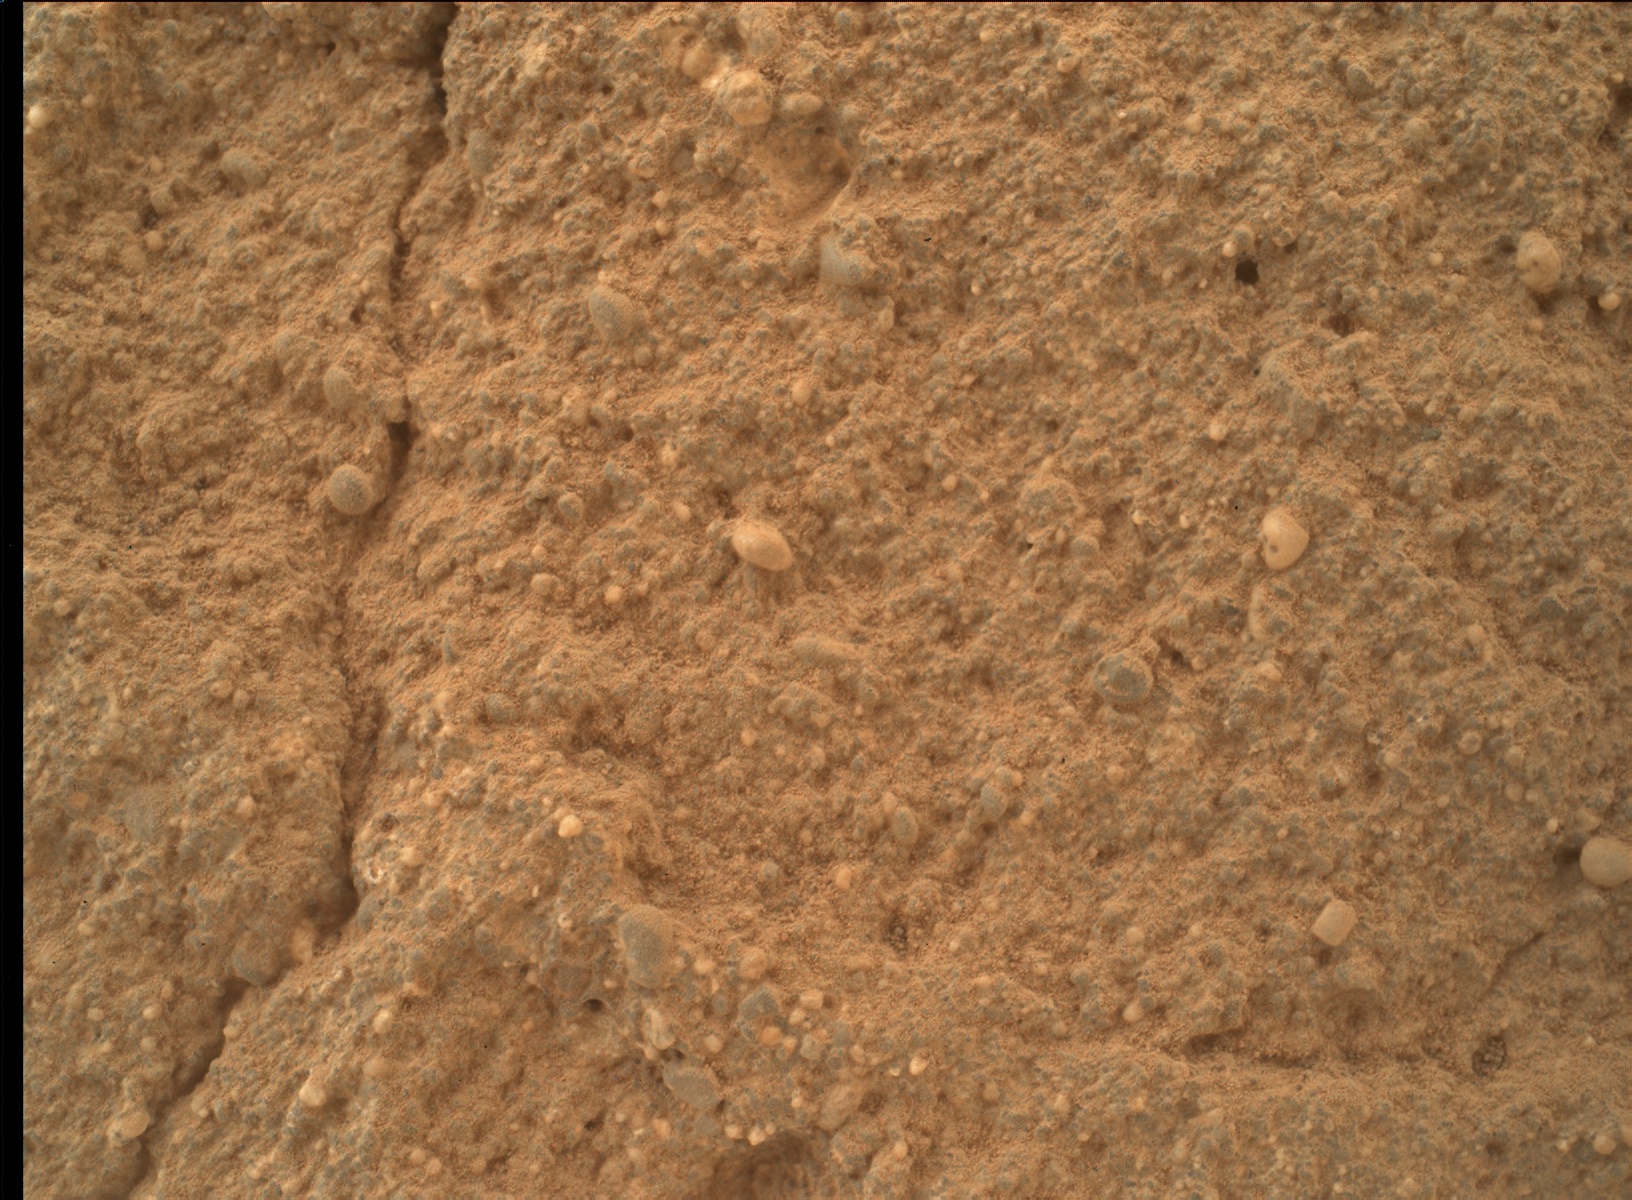 Nasa's Mars rover Curiosity acquired this image using its Mars Hand Lens Imager (MAHLI) on Sol 999